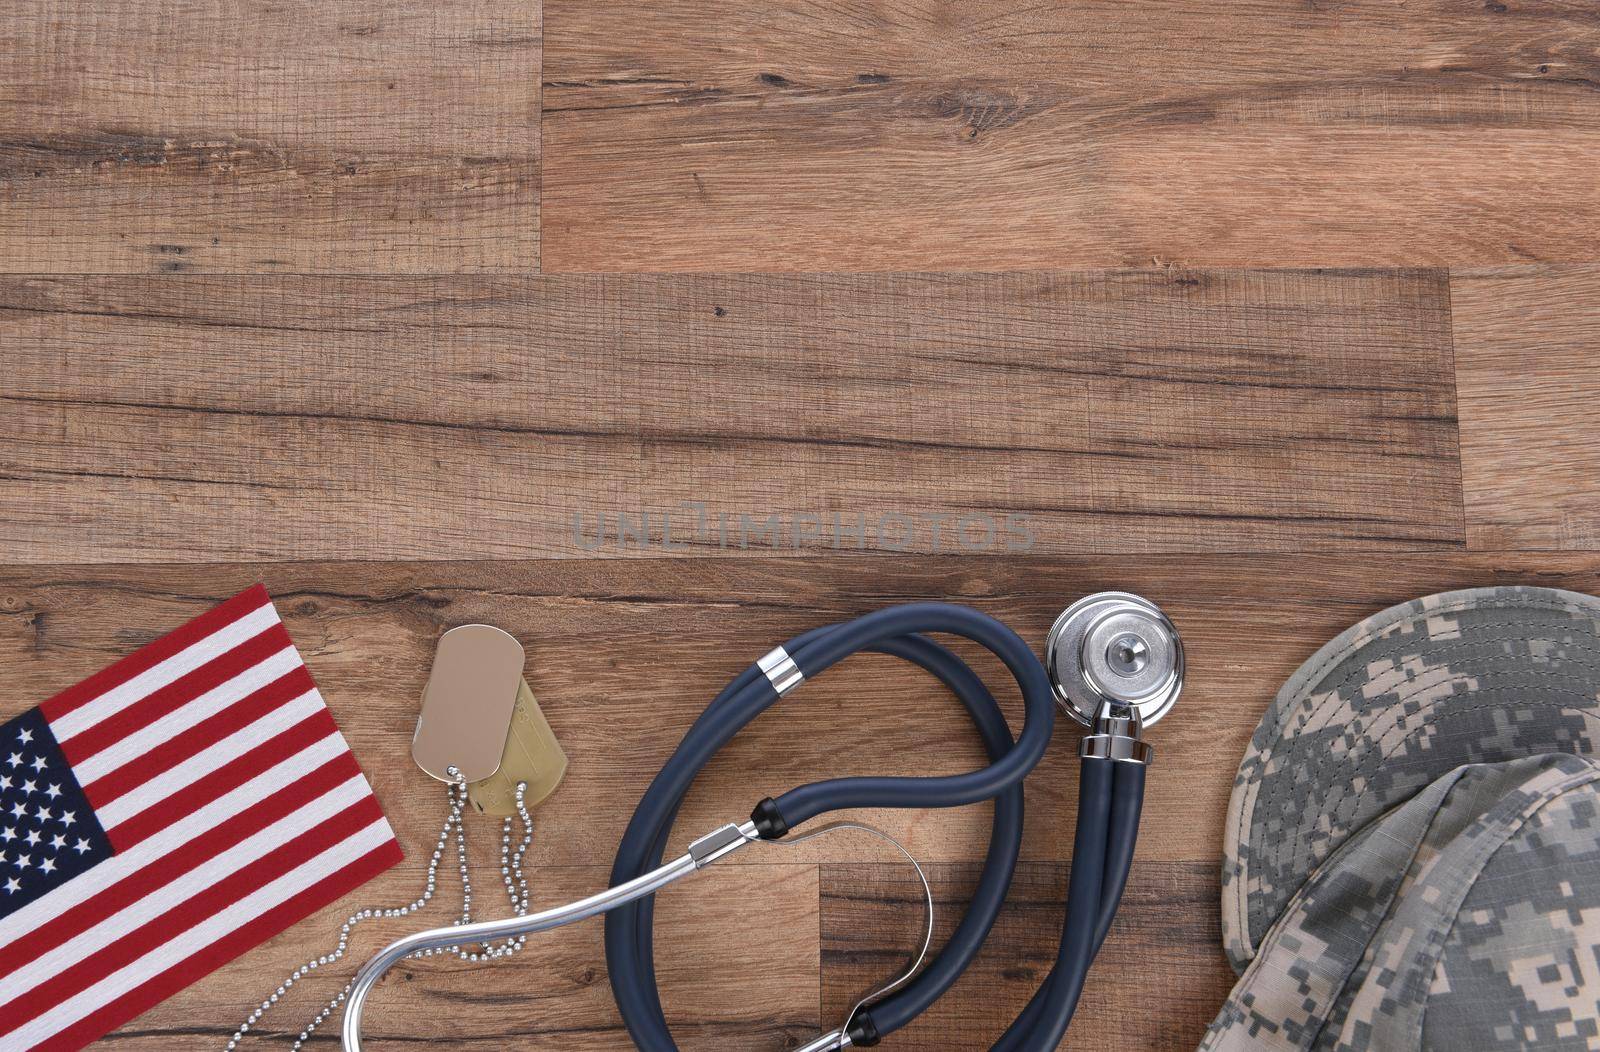 Military Health Care Concept. Camo hat, dog tags, stethoscope, pills, and American Flags on a wood background. 